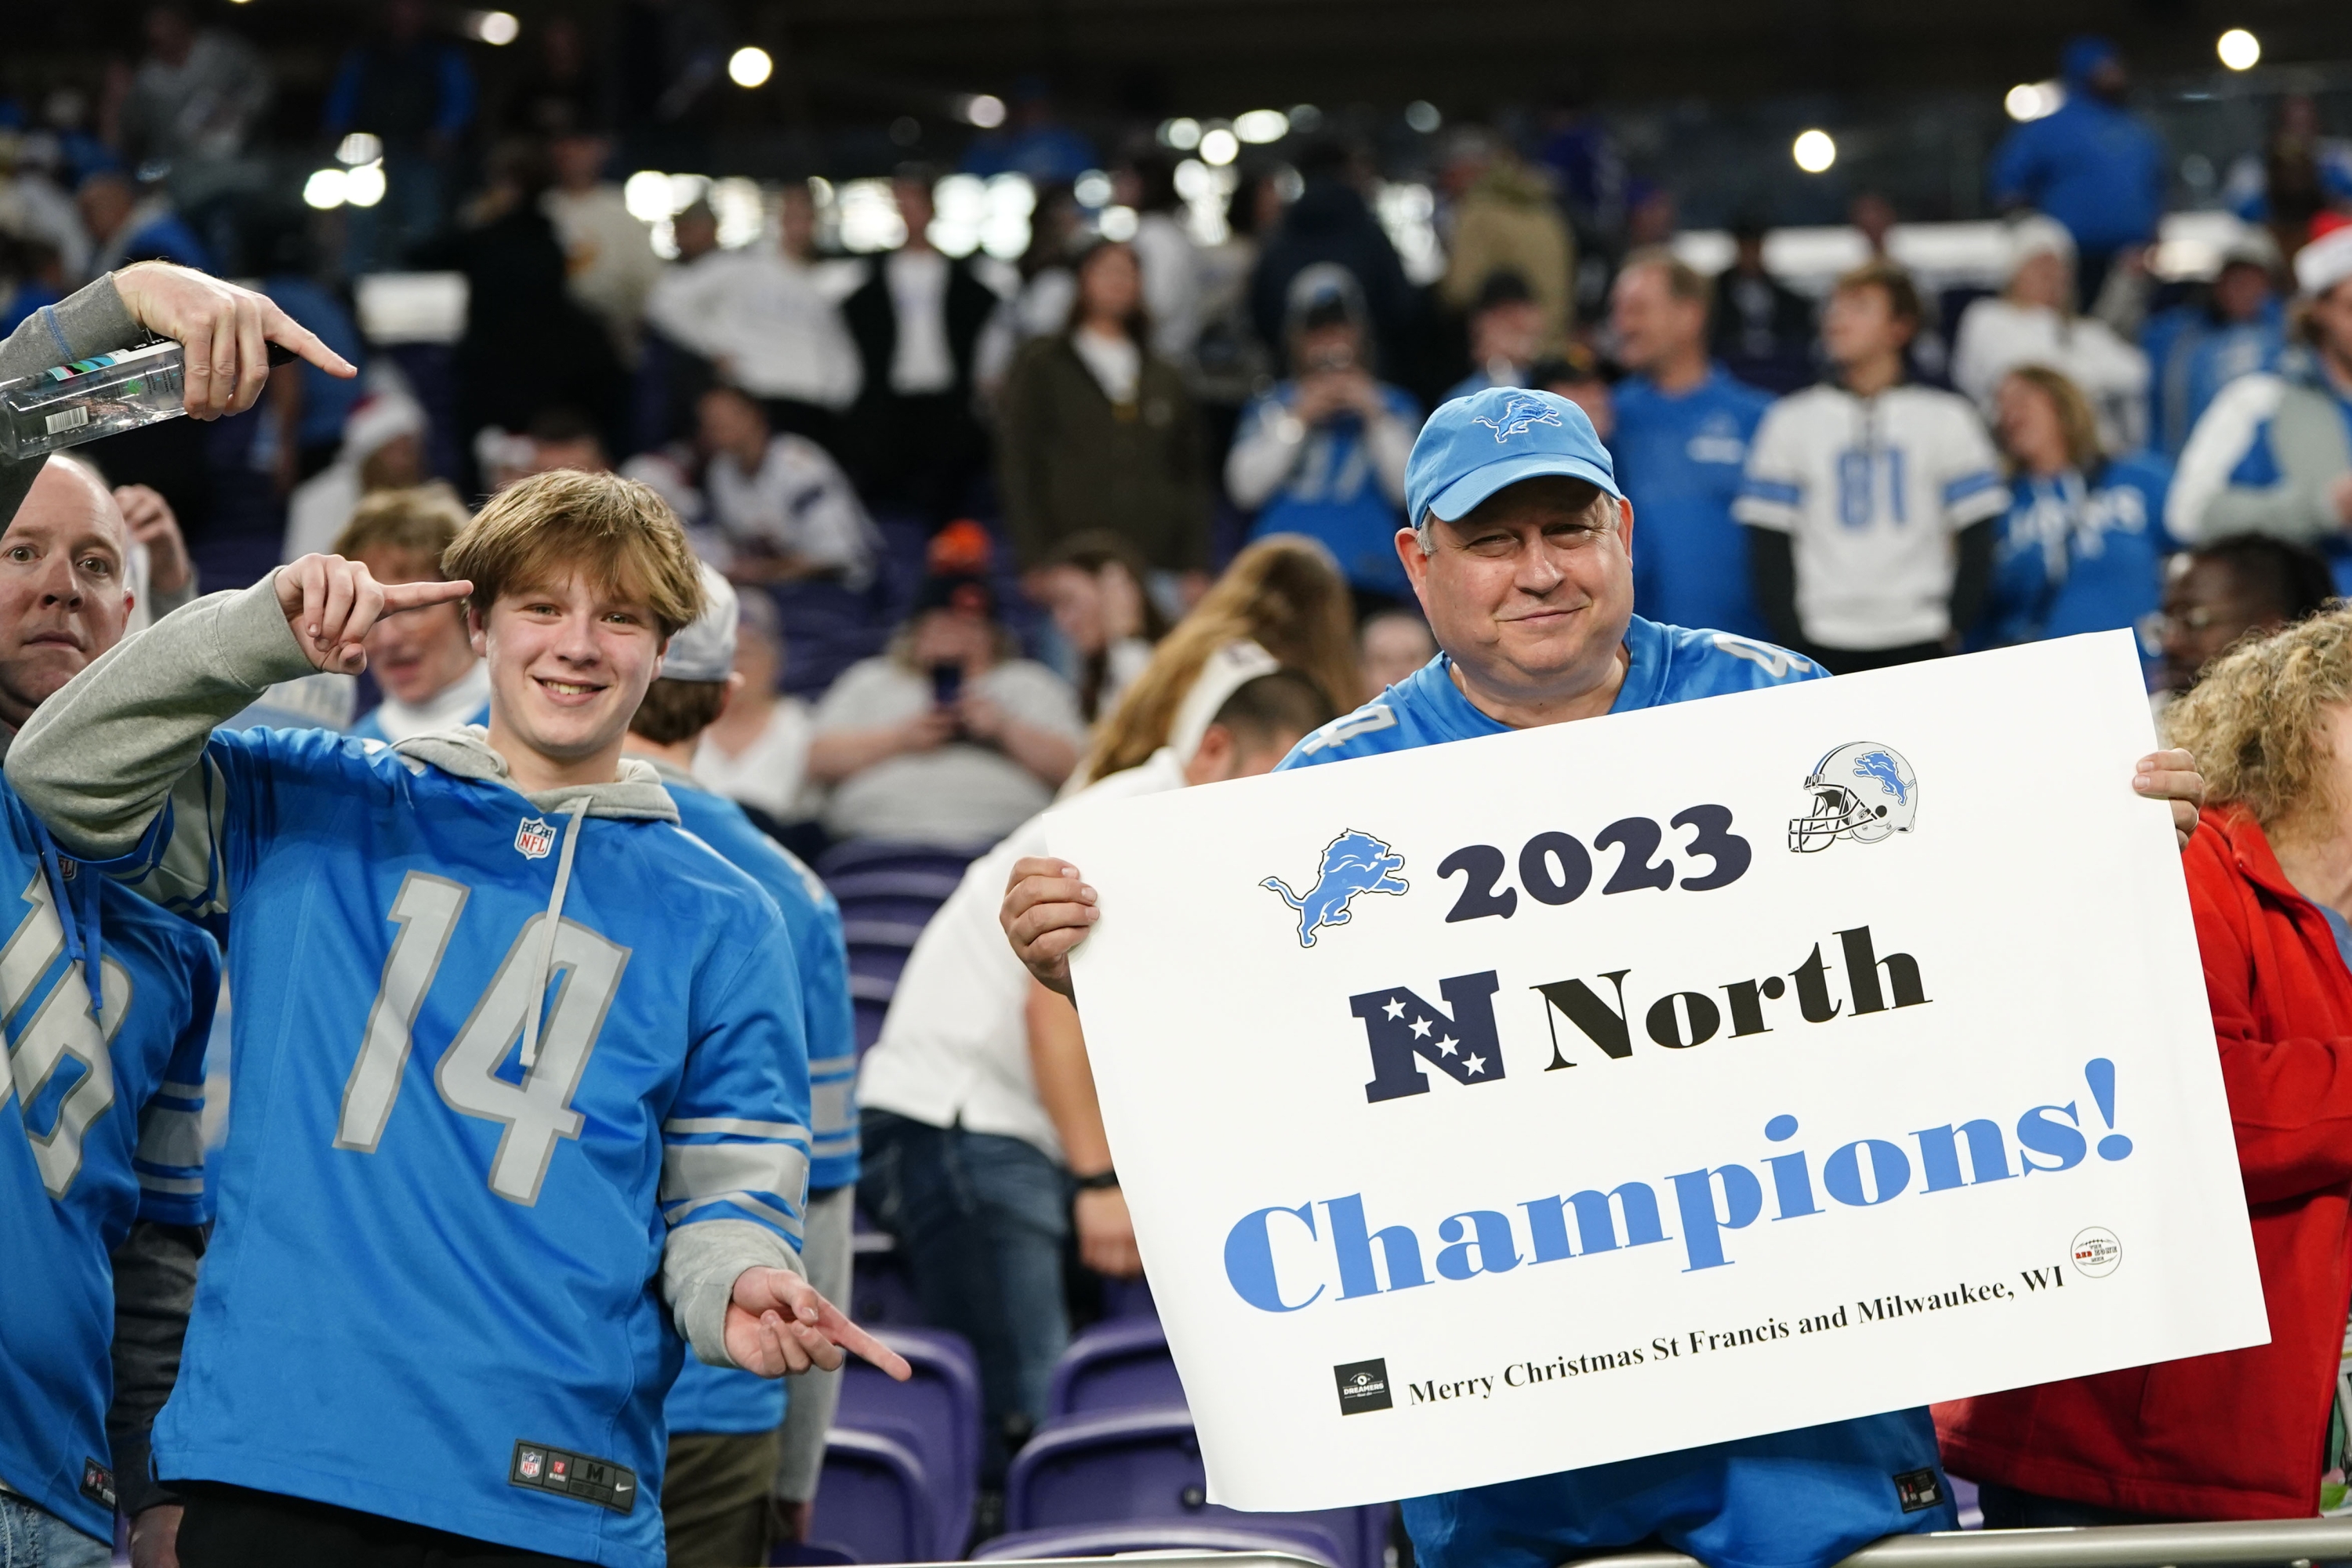 Fans celebrate after an NFL football game between the Minnesota Vikings and the Detroit Lions, Sunday, Dec. 24, 2023, in Minneapolis. The Lions won 30-24. (AP Photo/Abbie Parr)